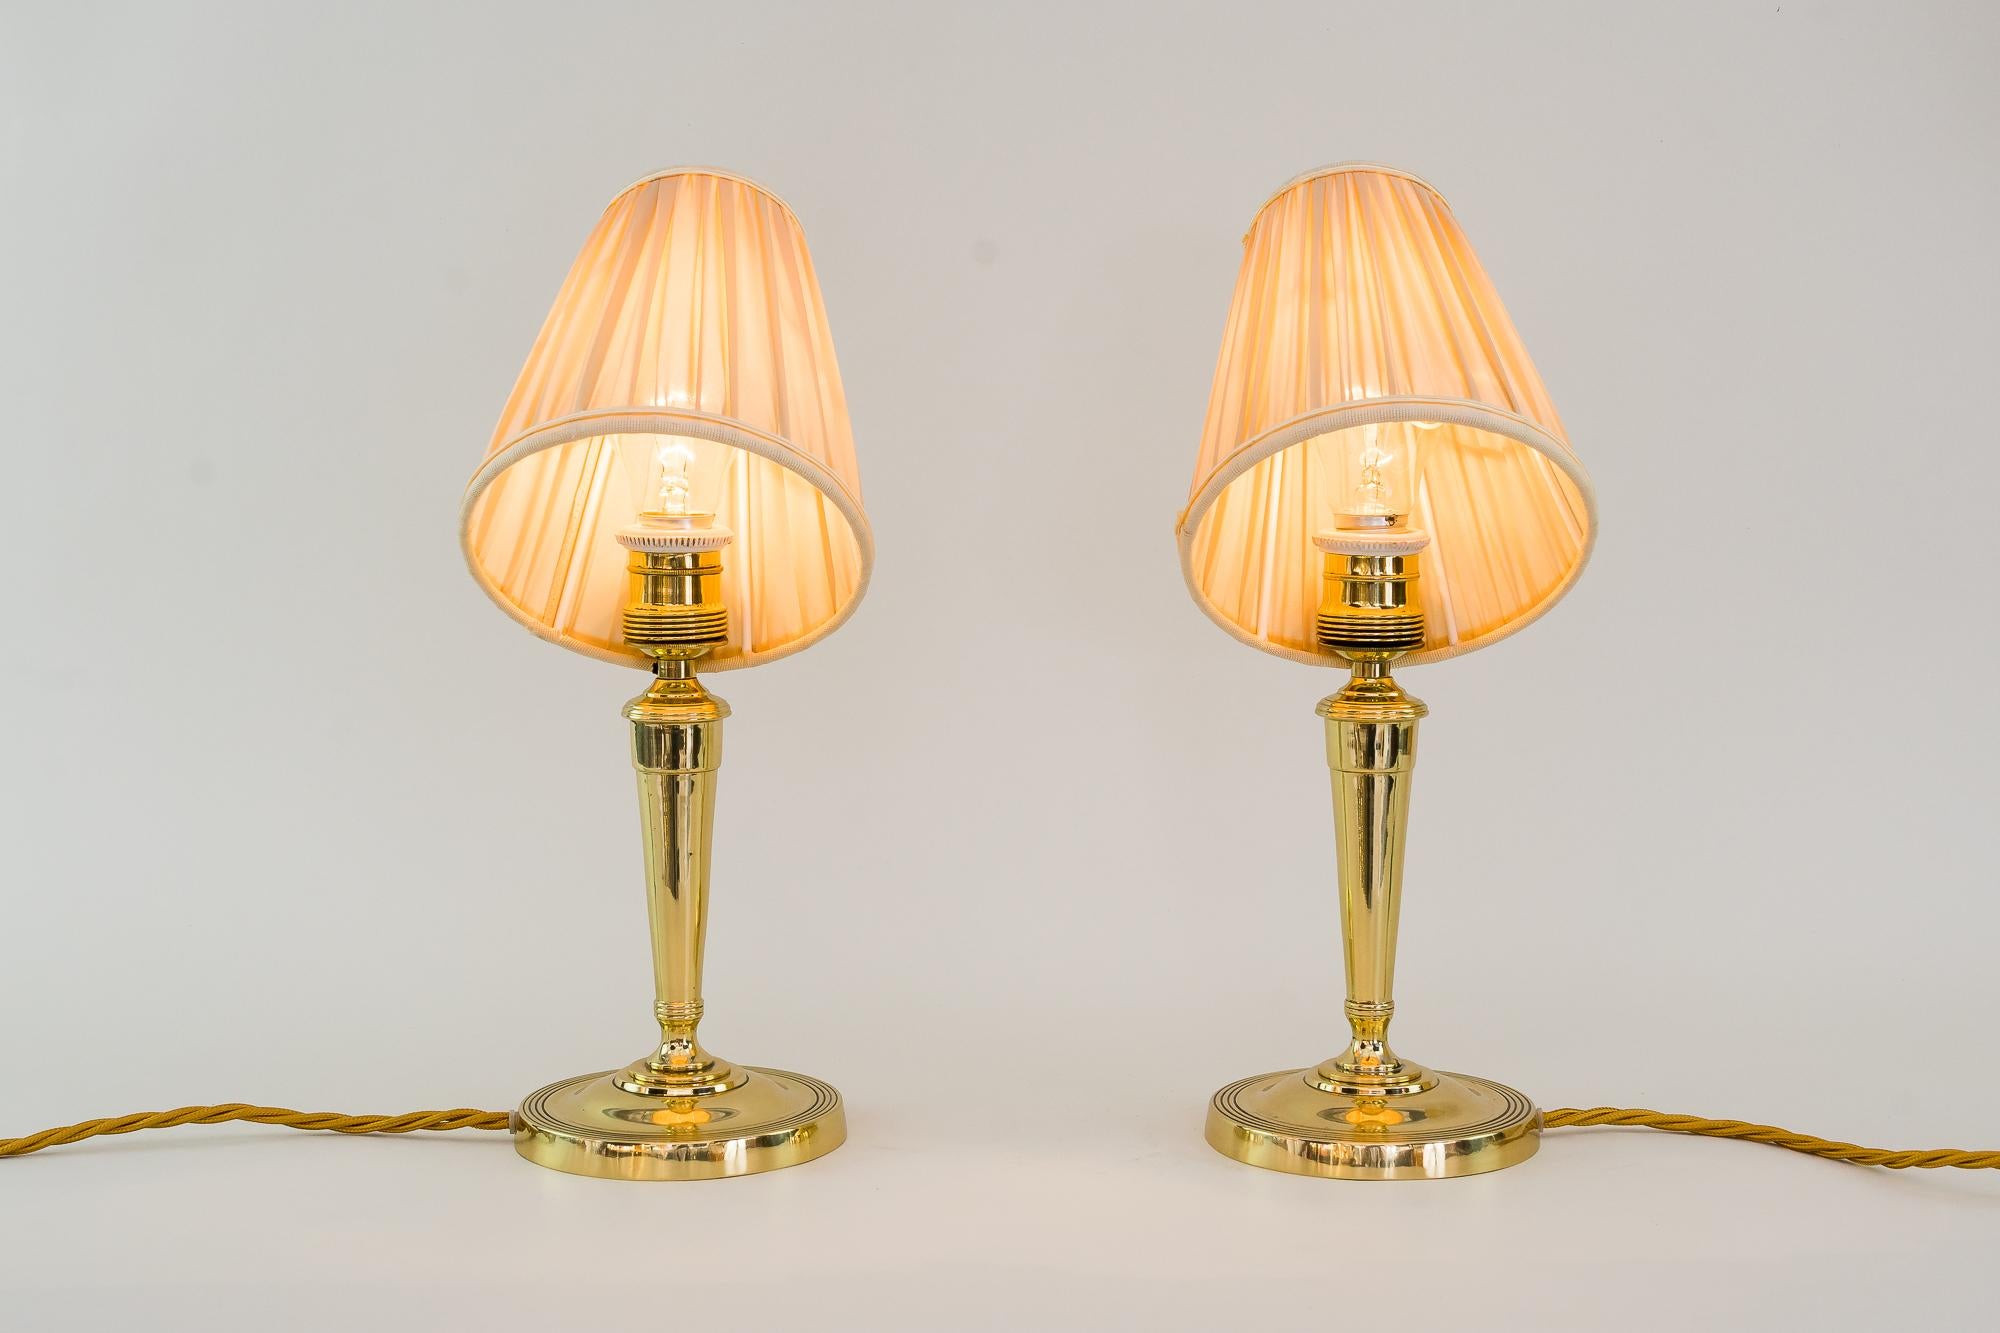 2 Art Deco table lamps, Vienna, around 1920s
Brass polished and stove enameled.